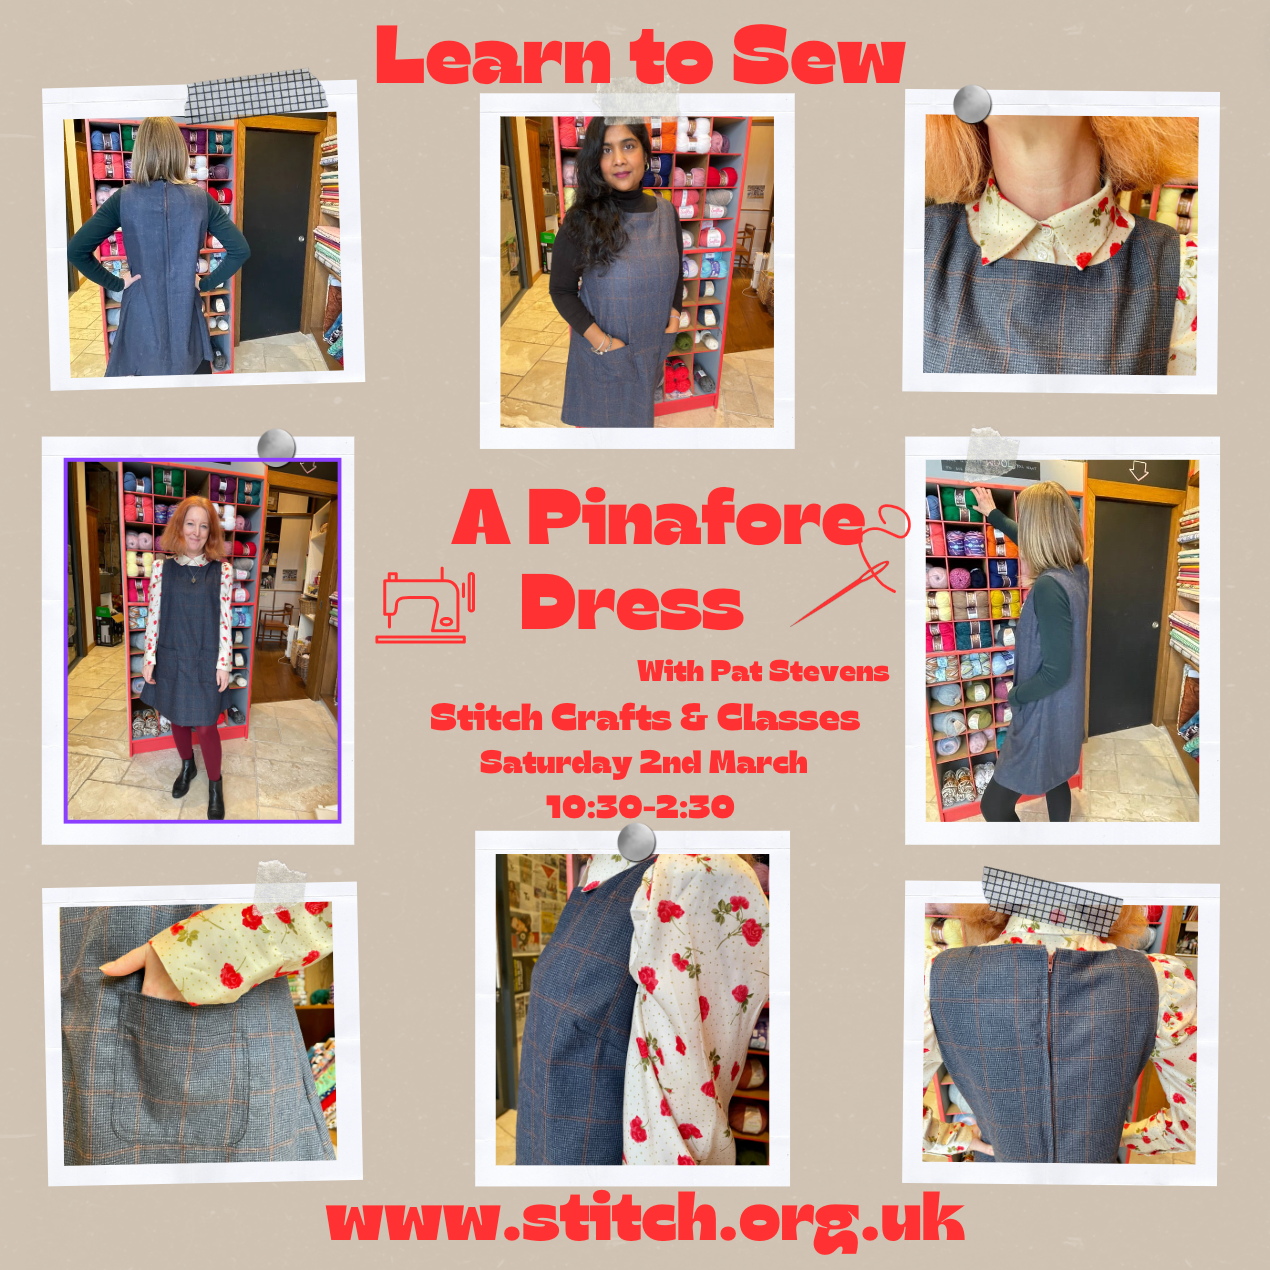 Learn to Sew a Pinafore Dress, Saturday 2nd March, 10:30-2:30